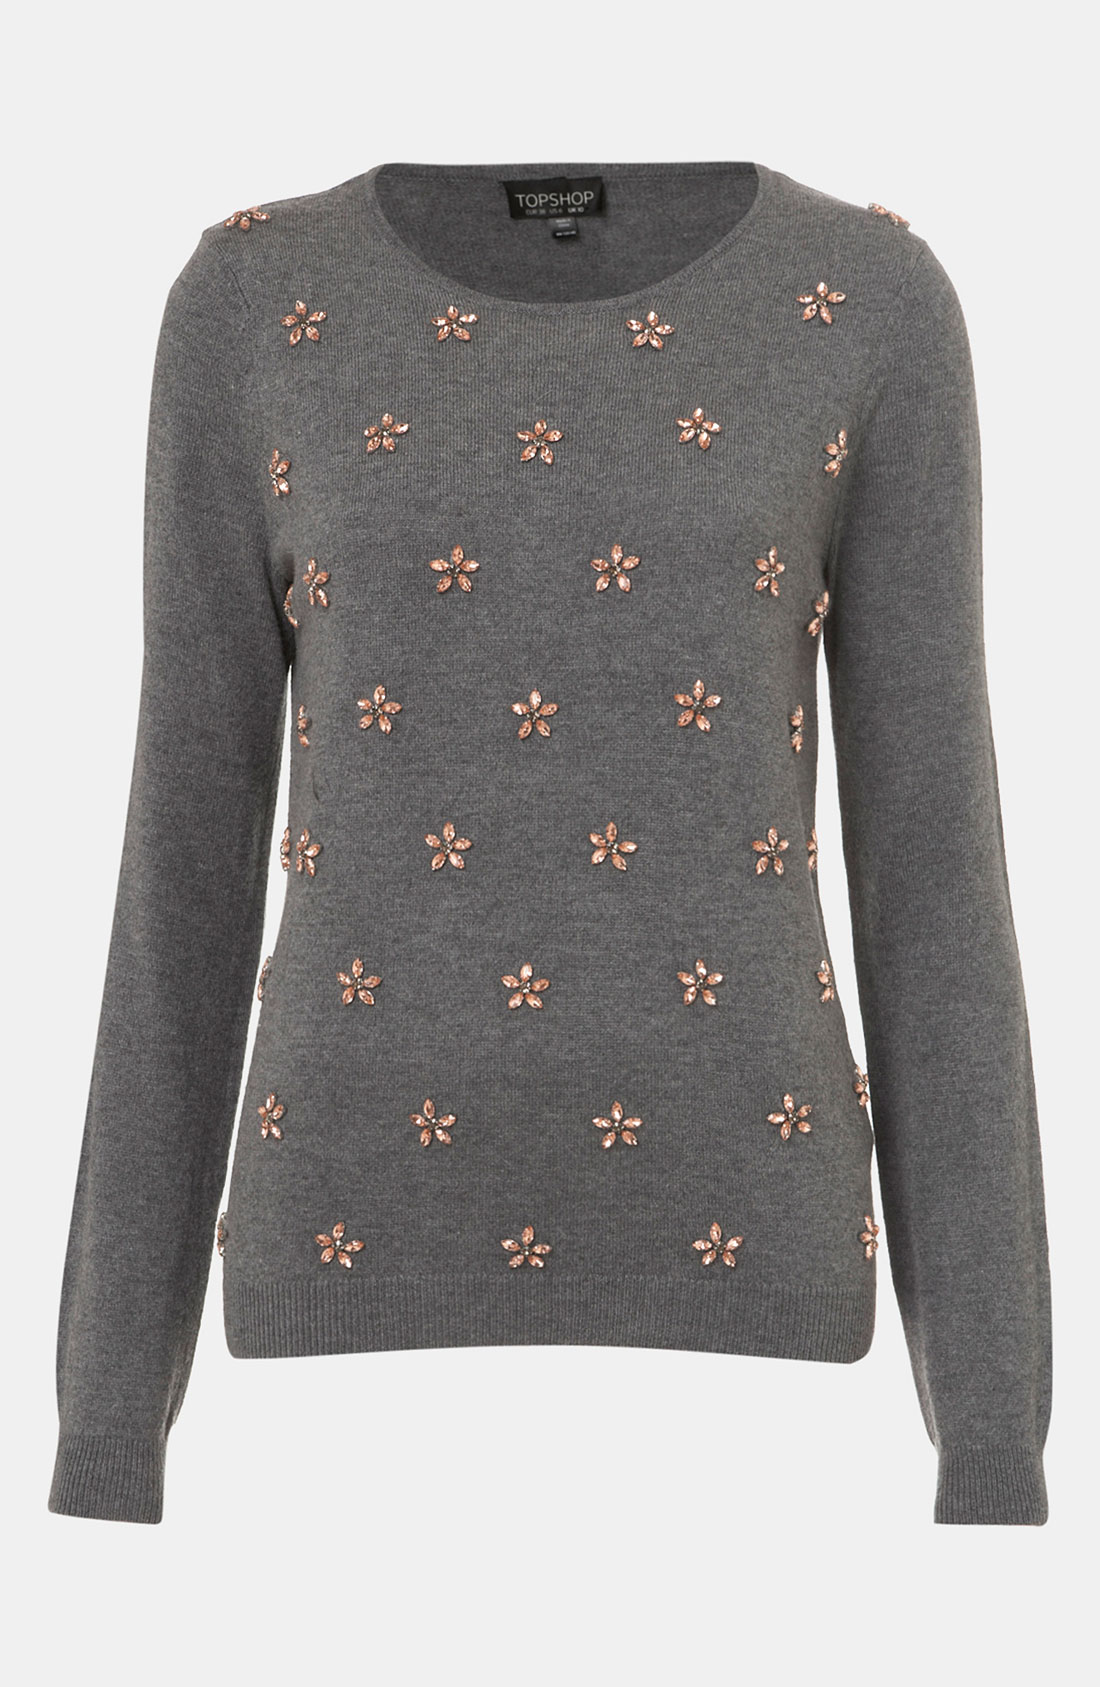 Topshop Knitted Flower Jumper in Gray (charcoal) | Lyst